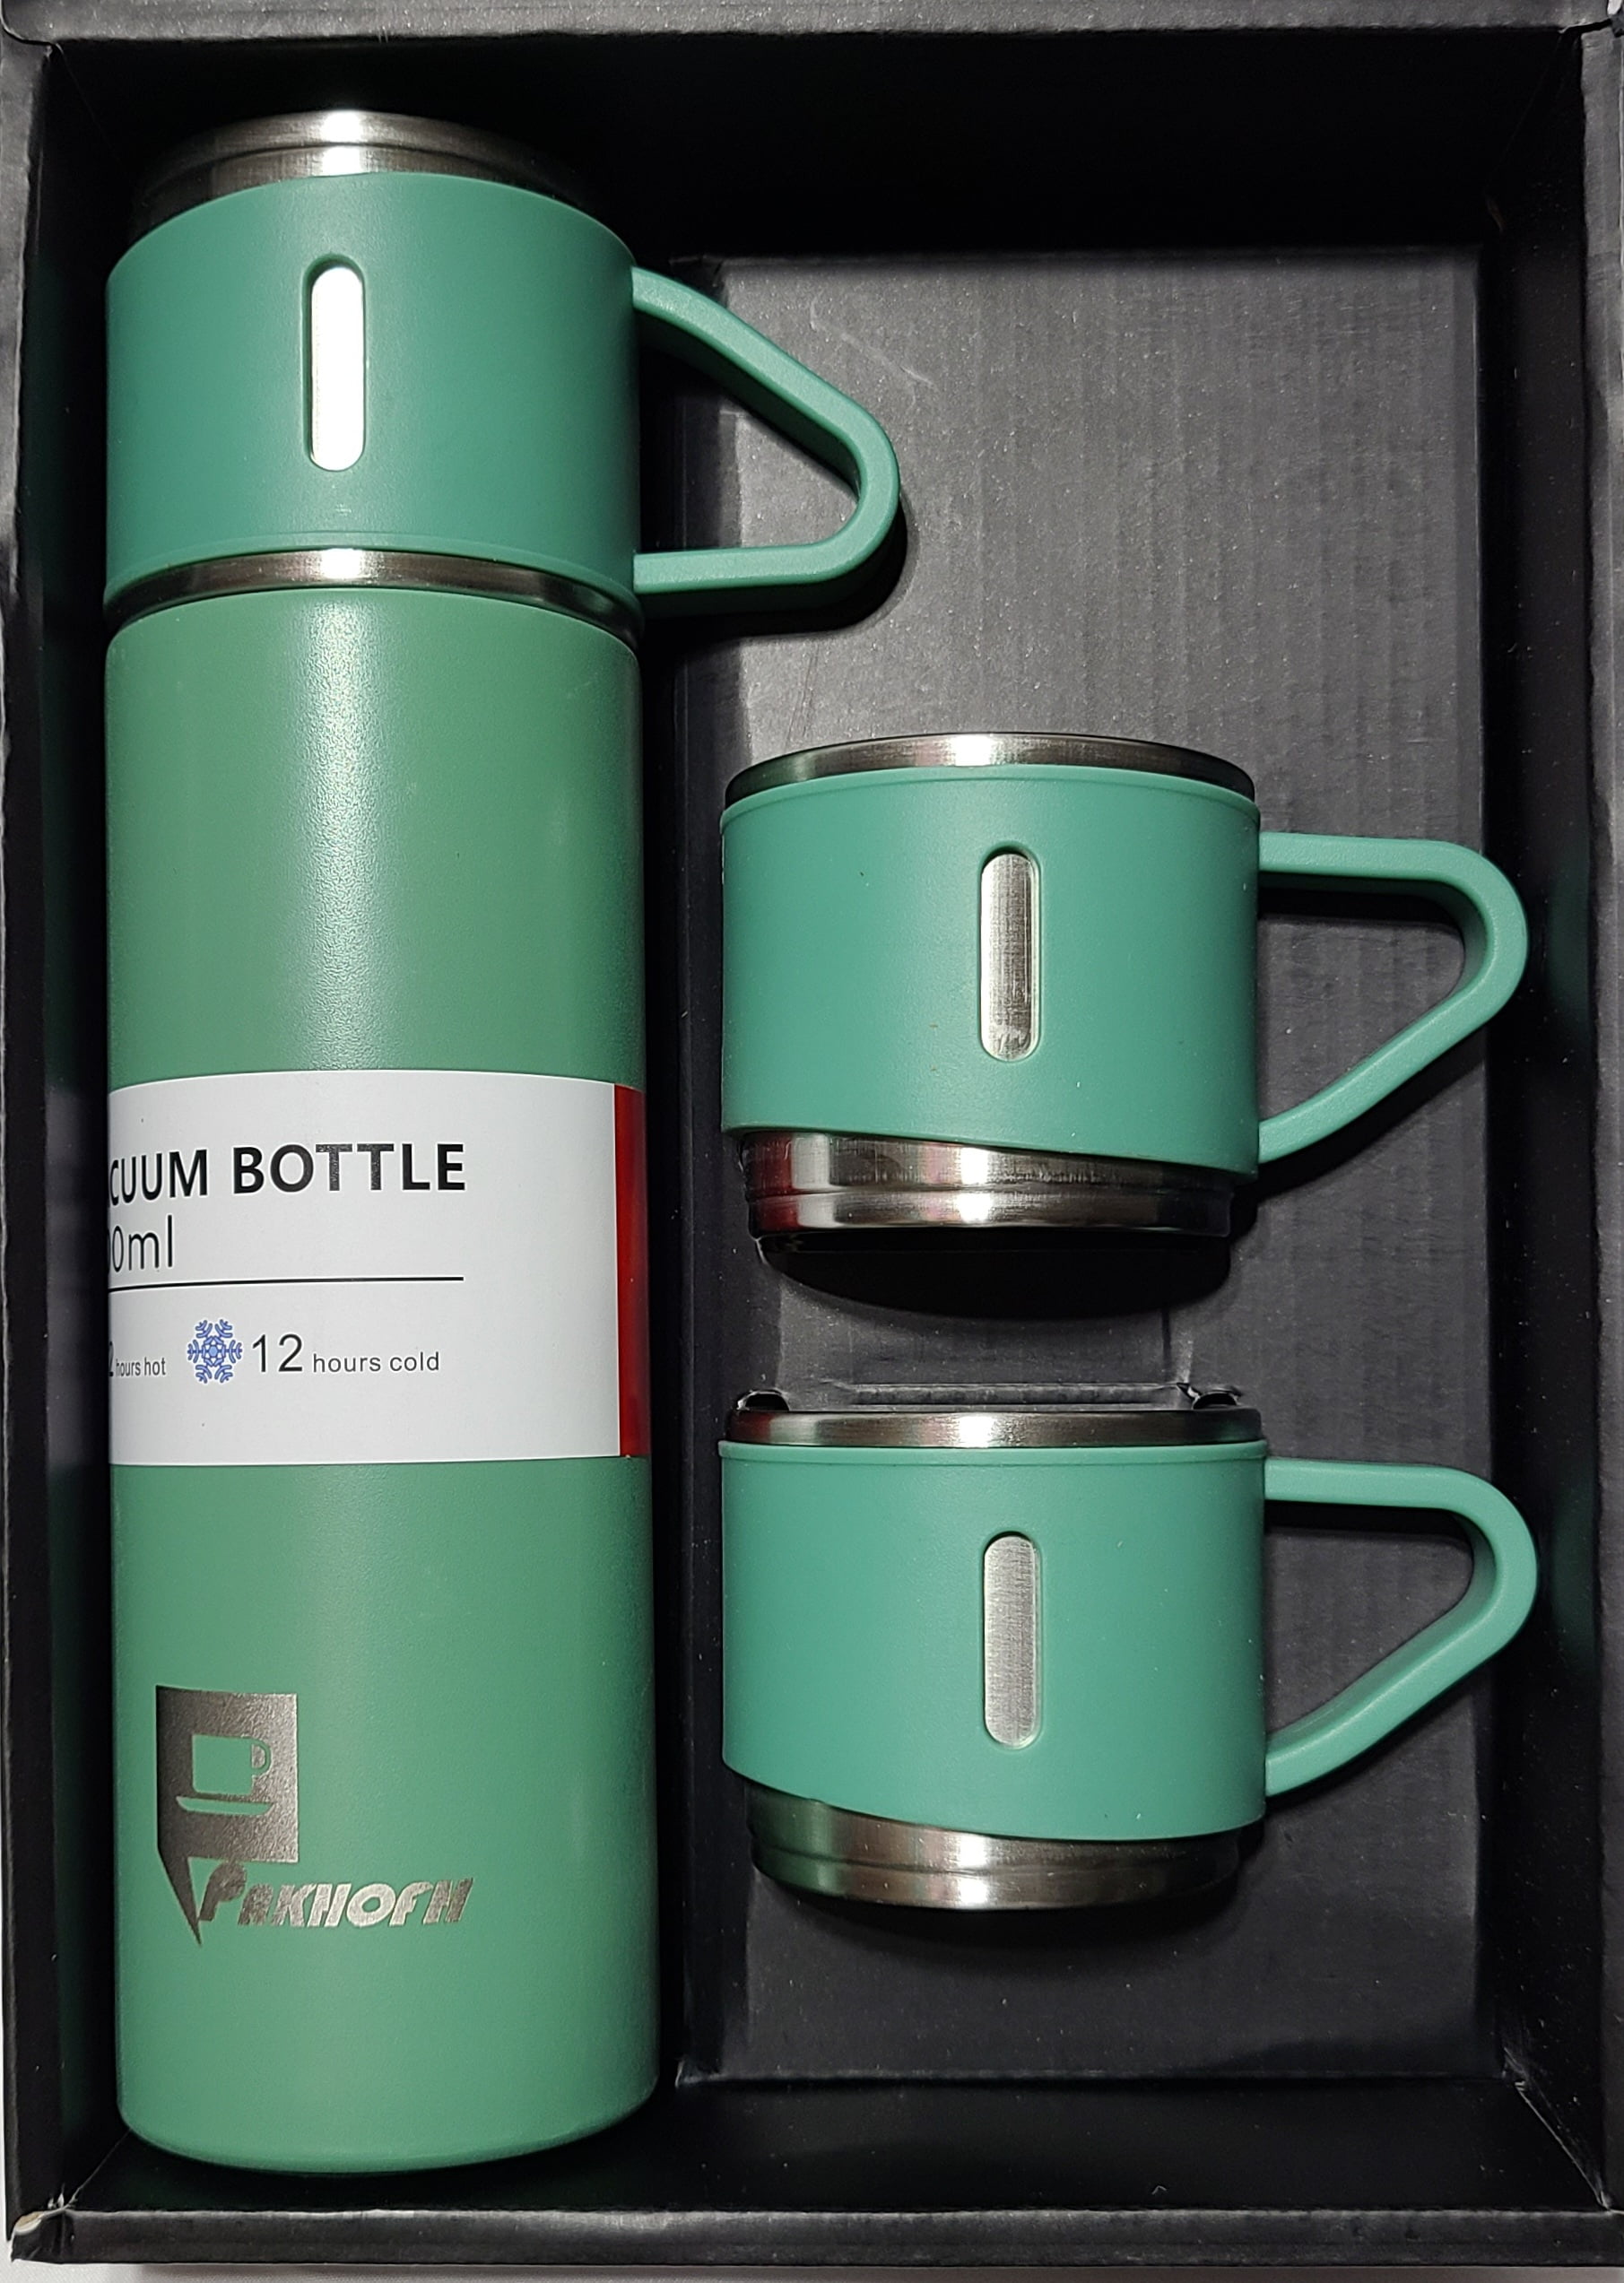 Stainless Steel Thermo 500ml/16.9oz Vacuum Insulated Bottle w/ Cup for Coffee Hot Drink & Cold Drink Water flask.(Green, Single)